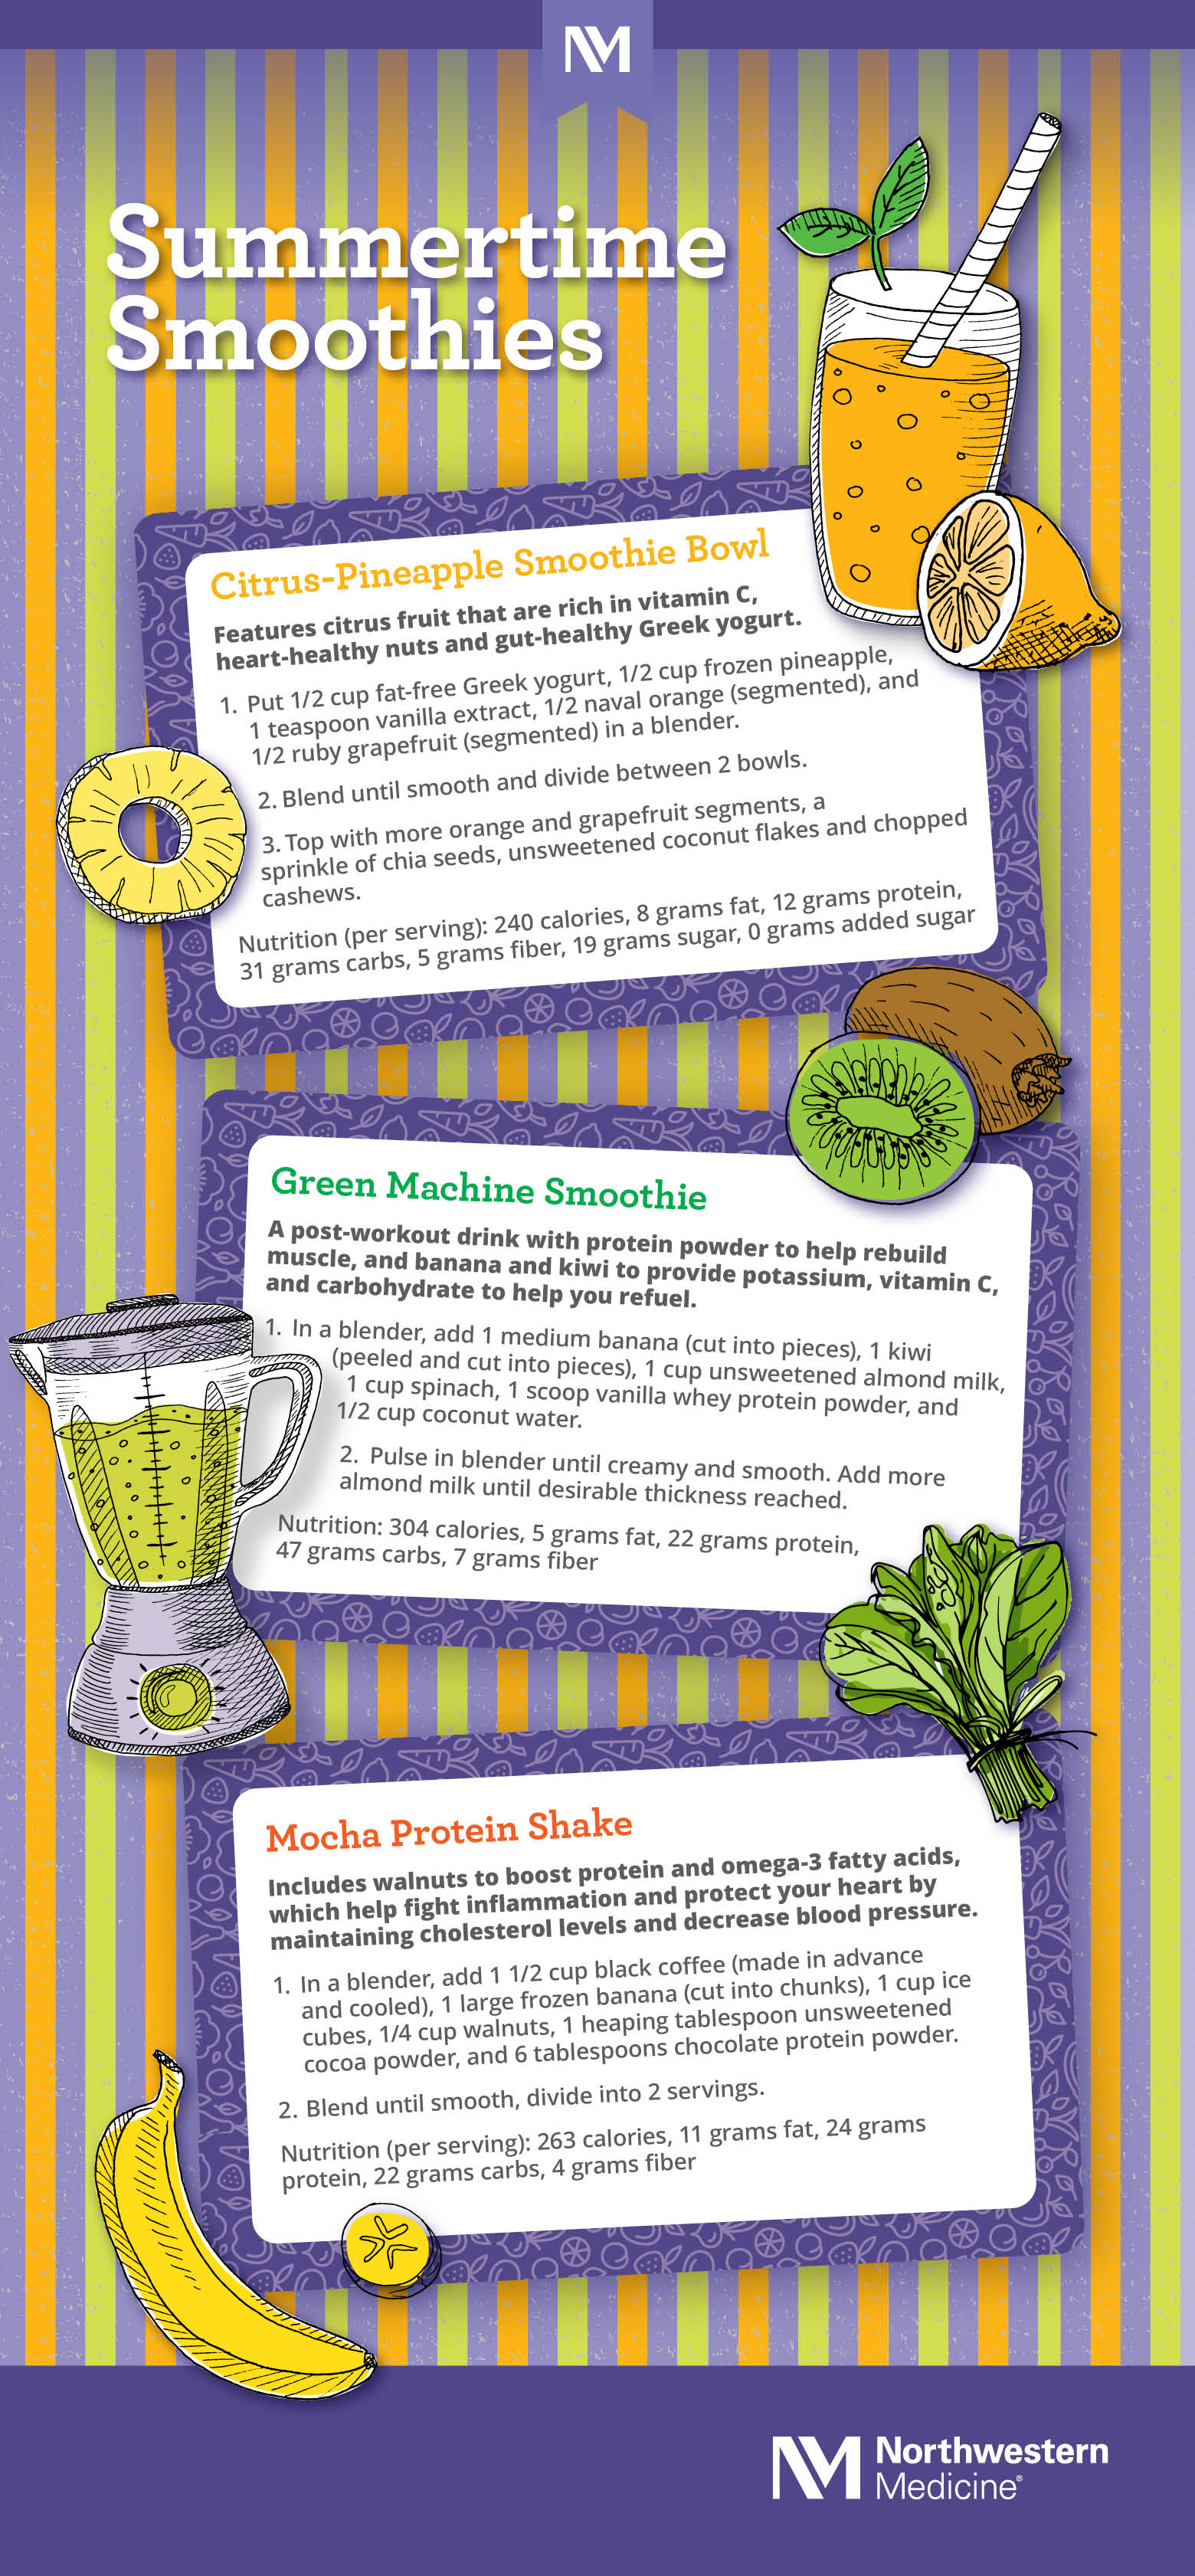 Graphic with the headline, "Summertime Smoothies" and three boxes with recipes for Citrus-Pineapple Smoothie Bowl, Green Machine Smoothie, and Mocha Protein Shake, on a purple, orange and green striped background with illustrations of drinks, a blender and fruit.